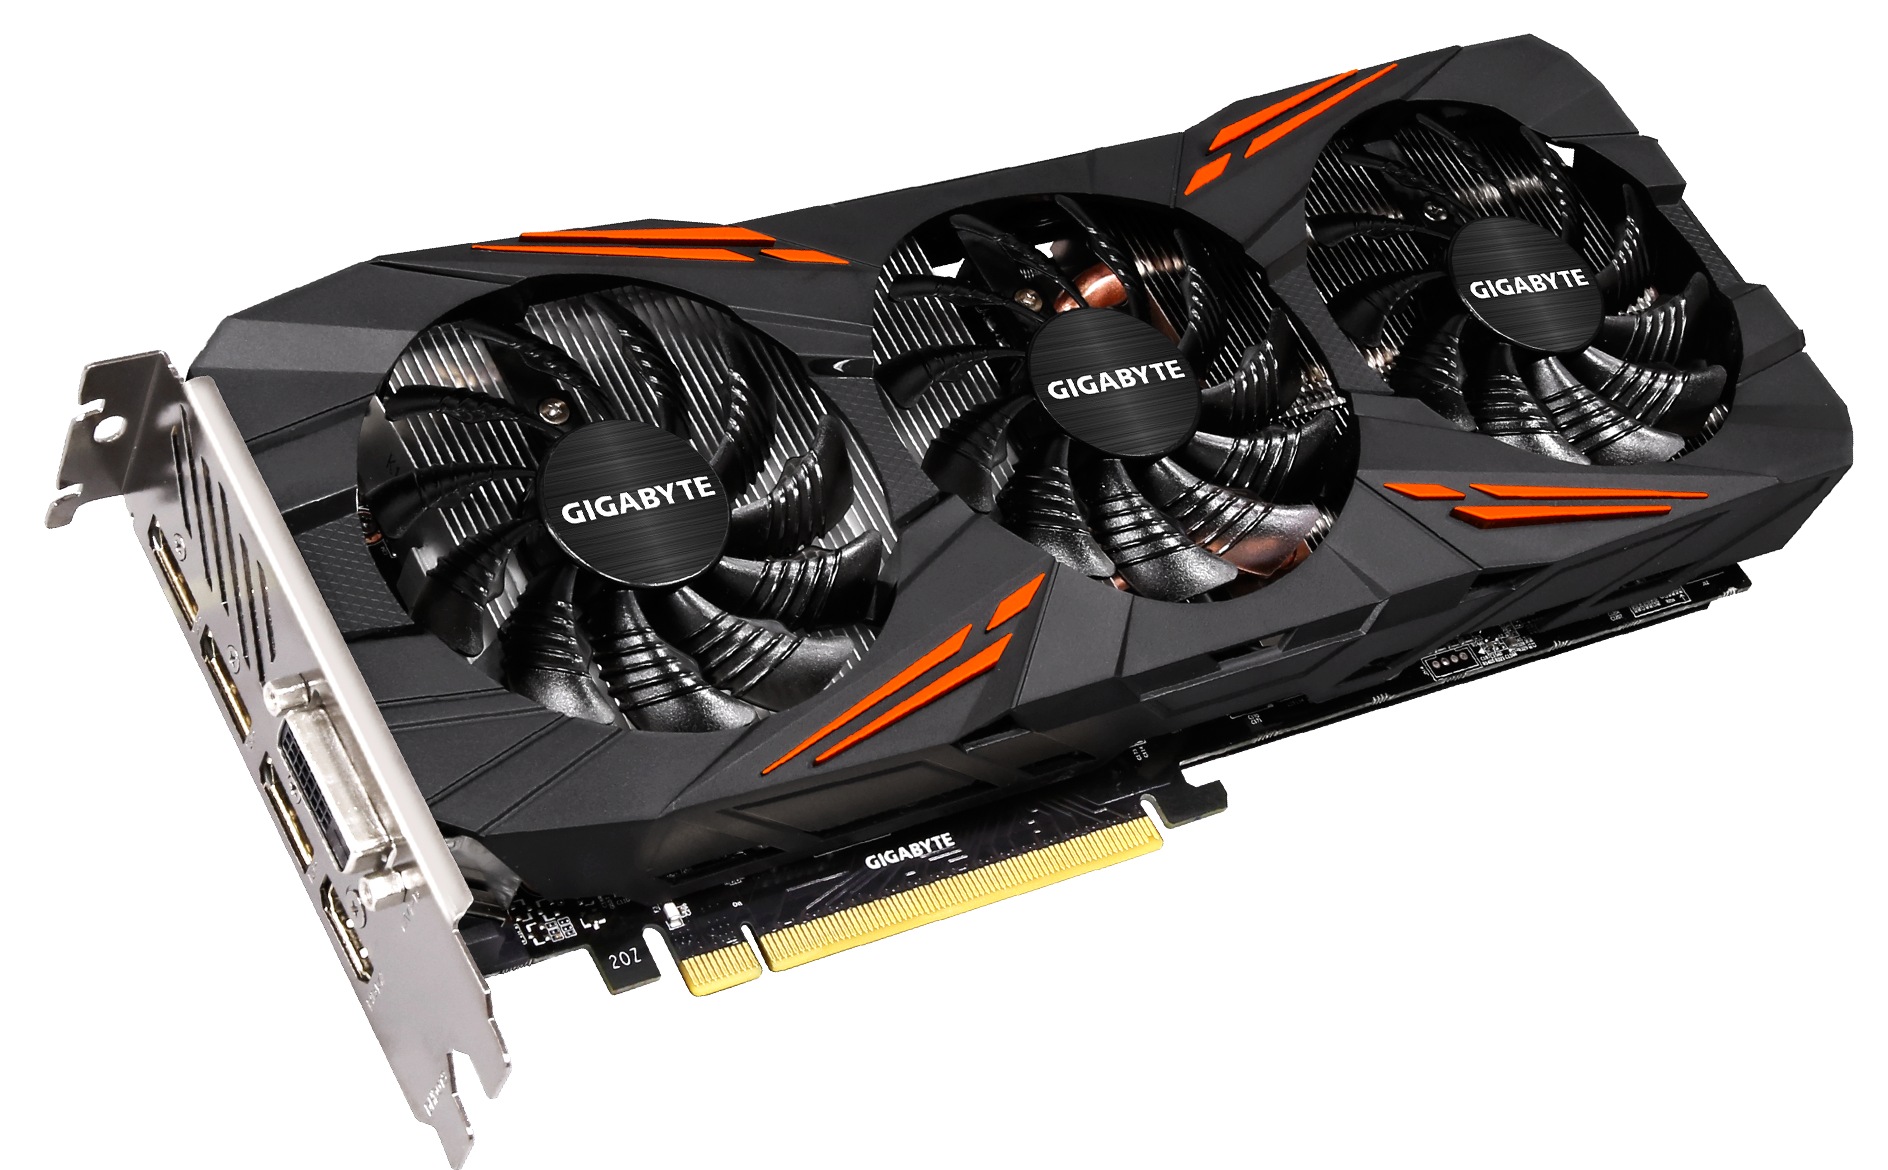 GIGABYTE Releases GeForce® GTX 1070 G1 GAMING Graphics Card | News